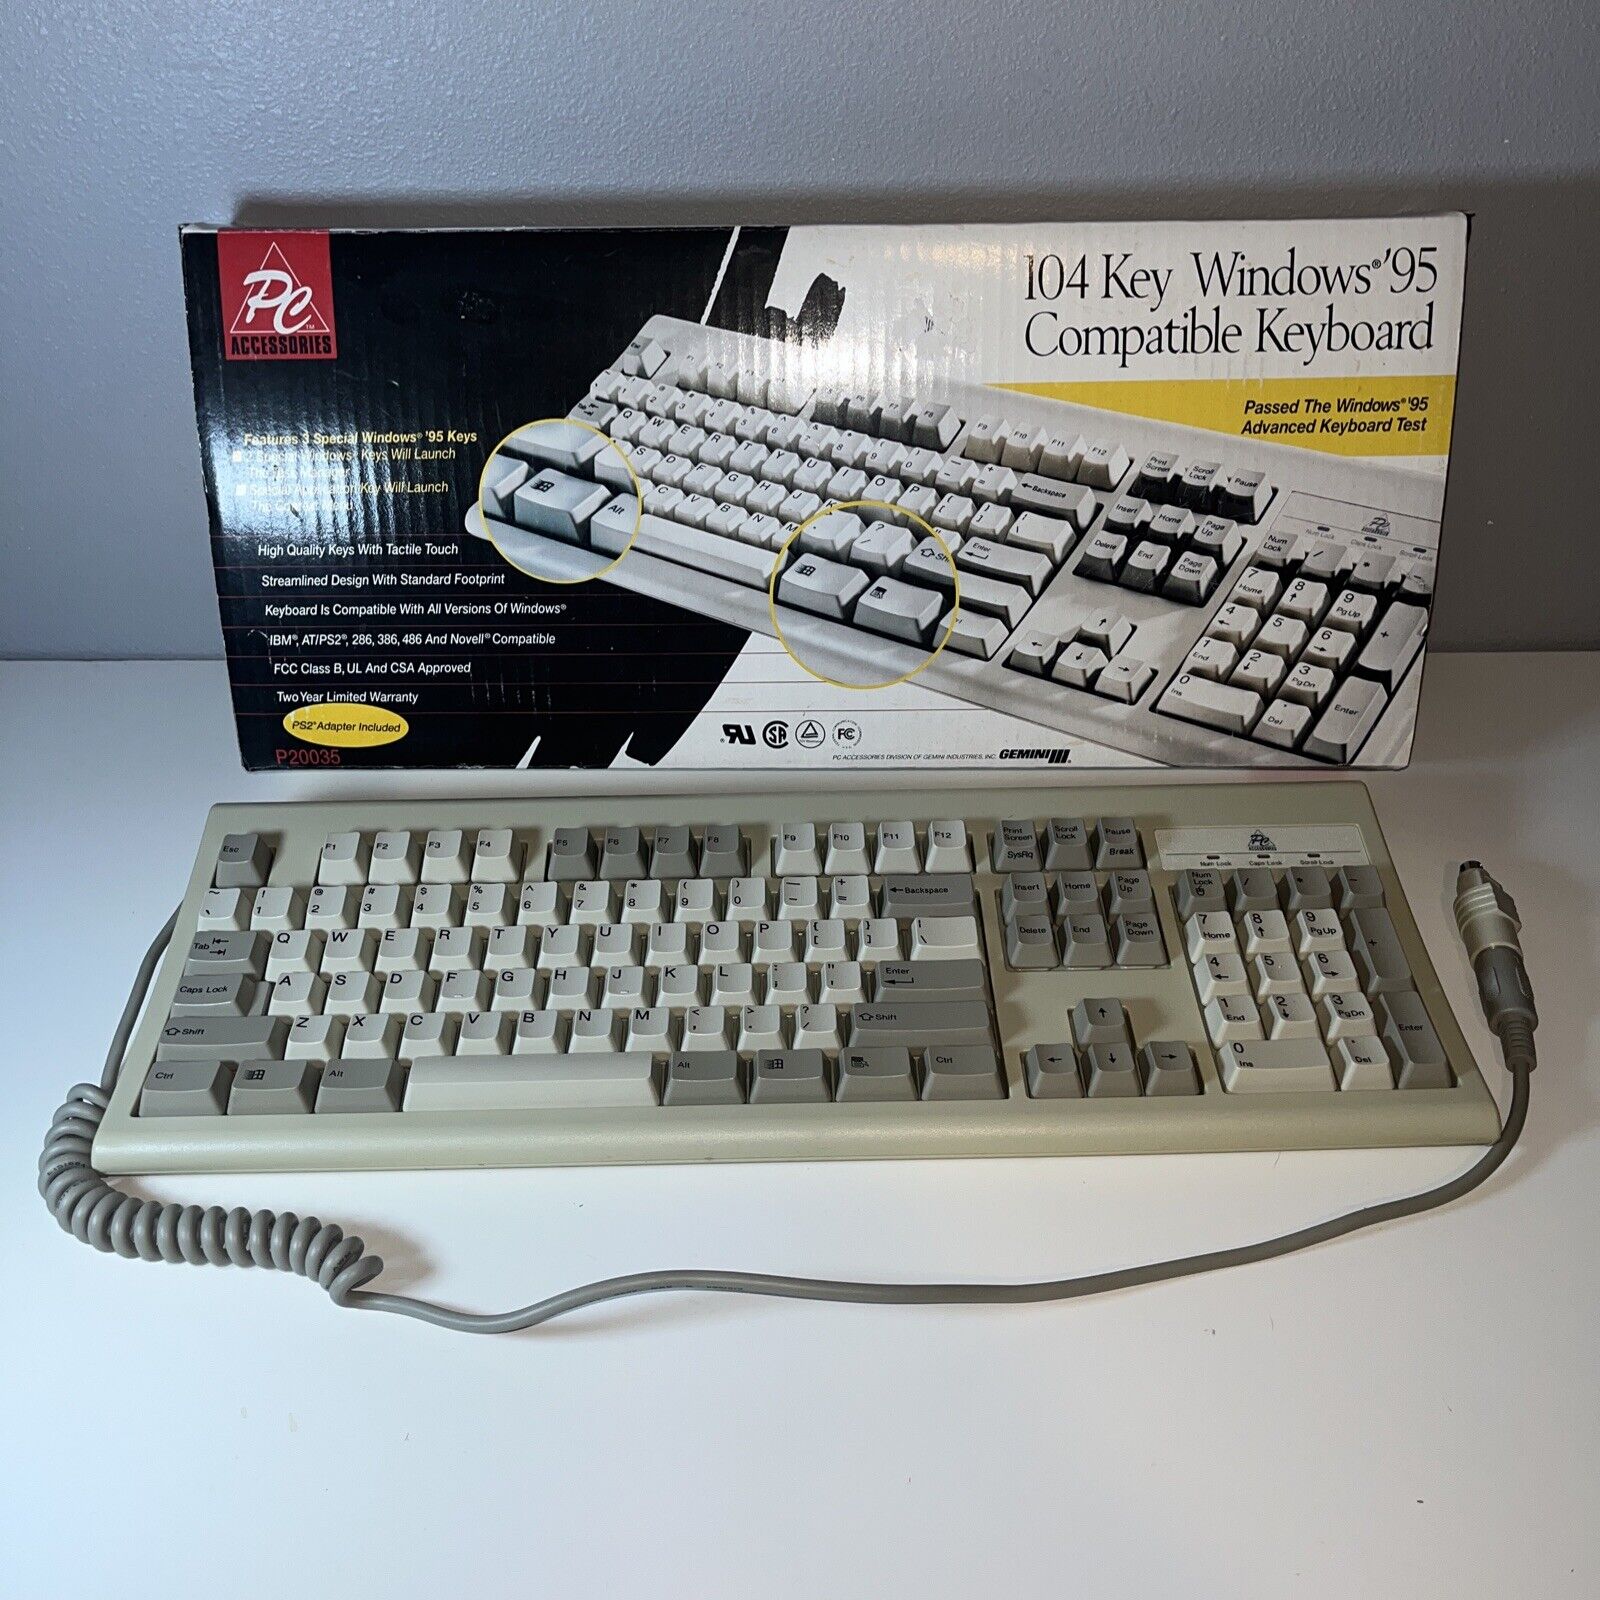 Vintage PC Accessories Keyboard P20035 With PS2 Adaptor Windows 95